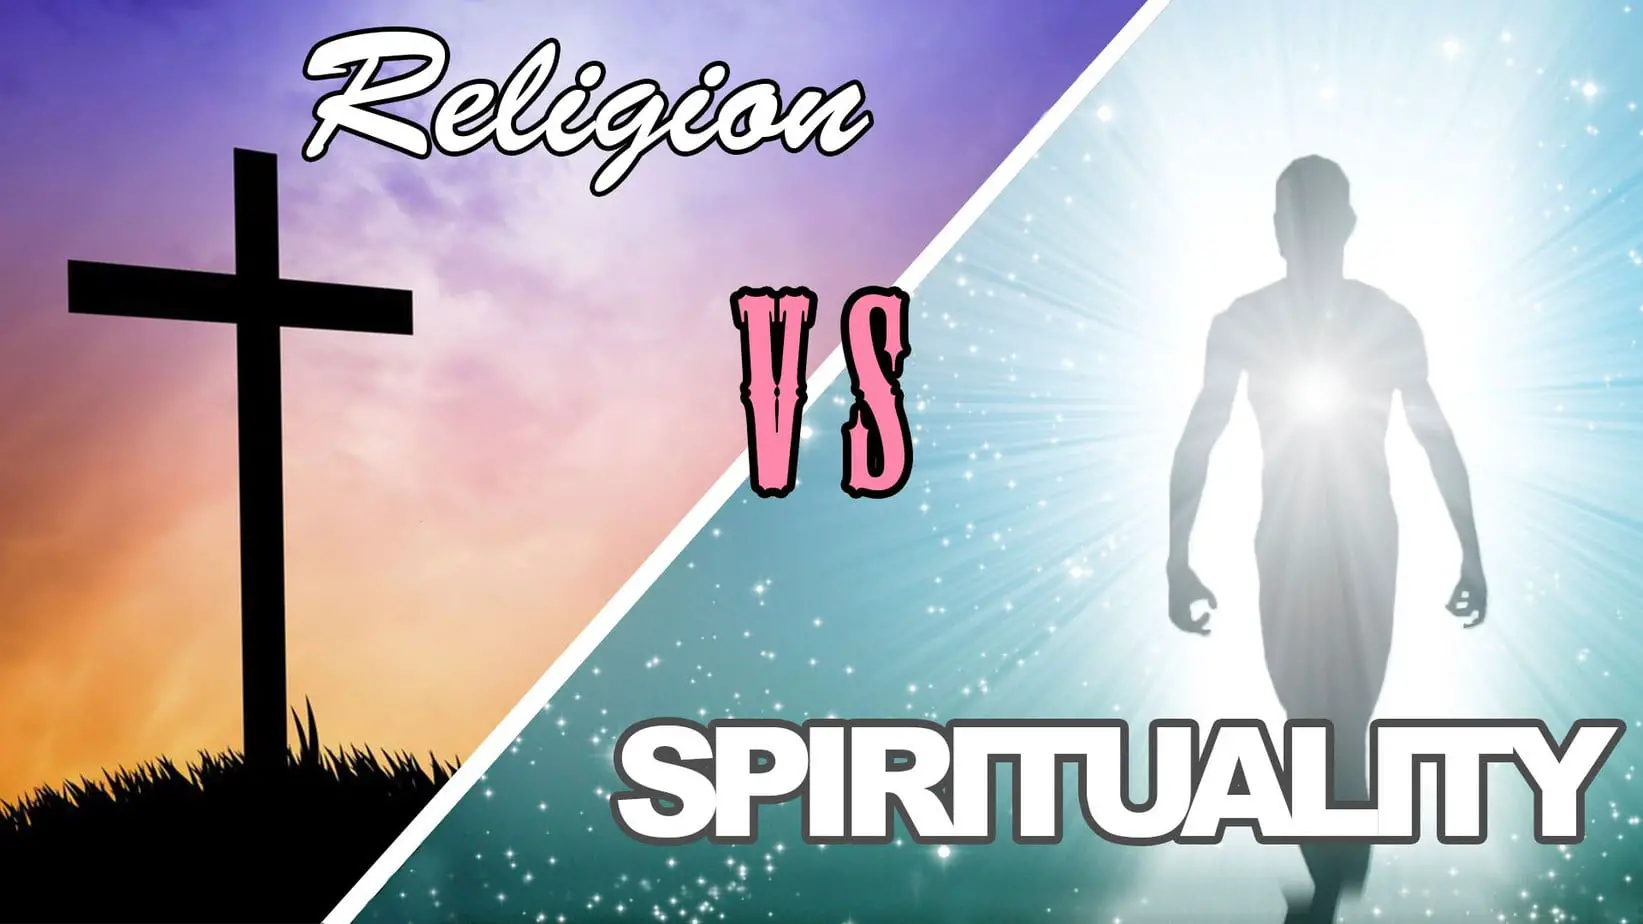 Religion Vs. Spirituality: What Are The Main Differences?